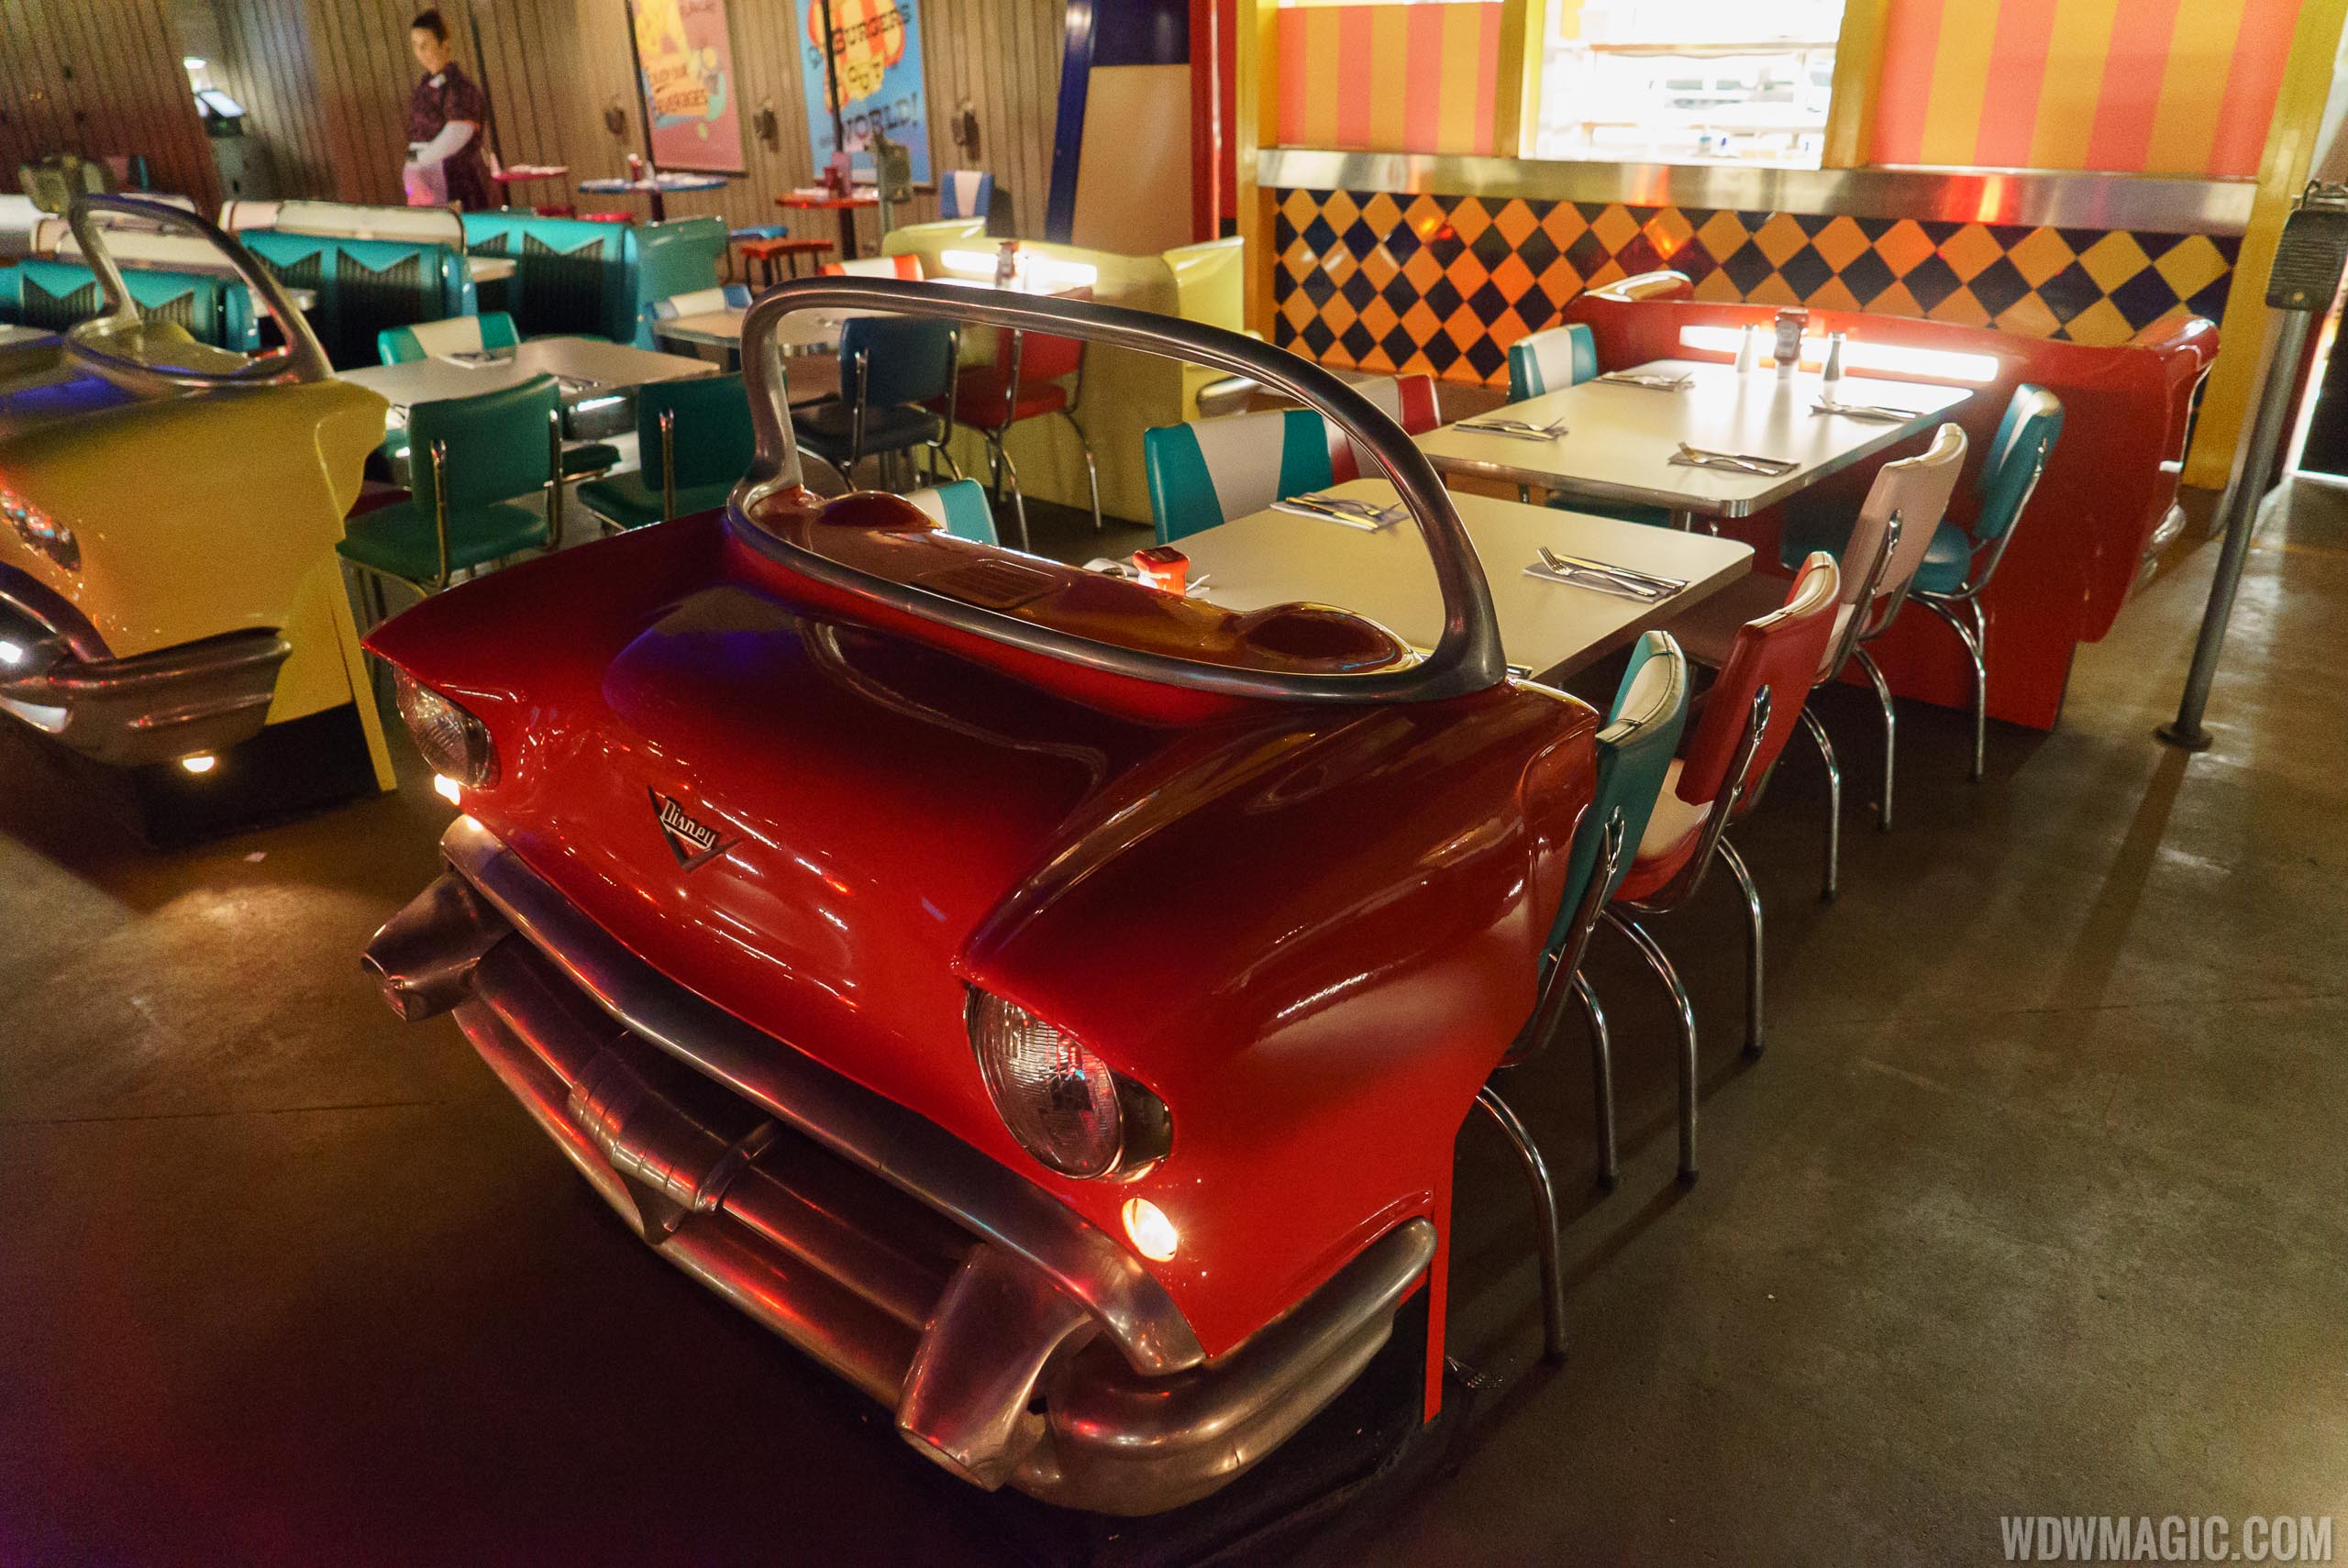 REVIEW - Breakfast at the Sci-Fi Dine-In at Disney's Hollywood Studios